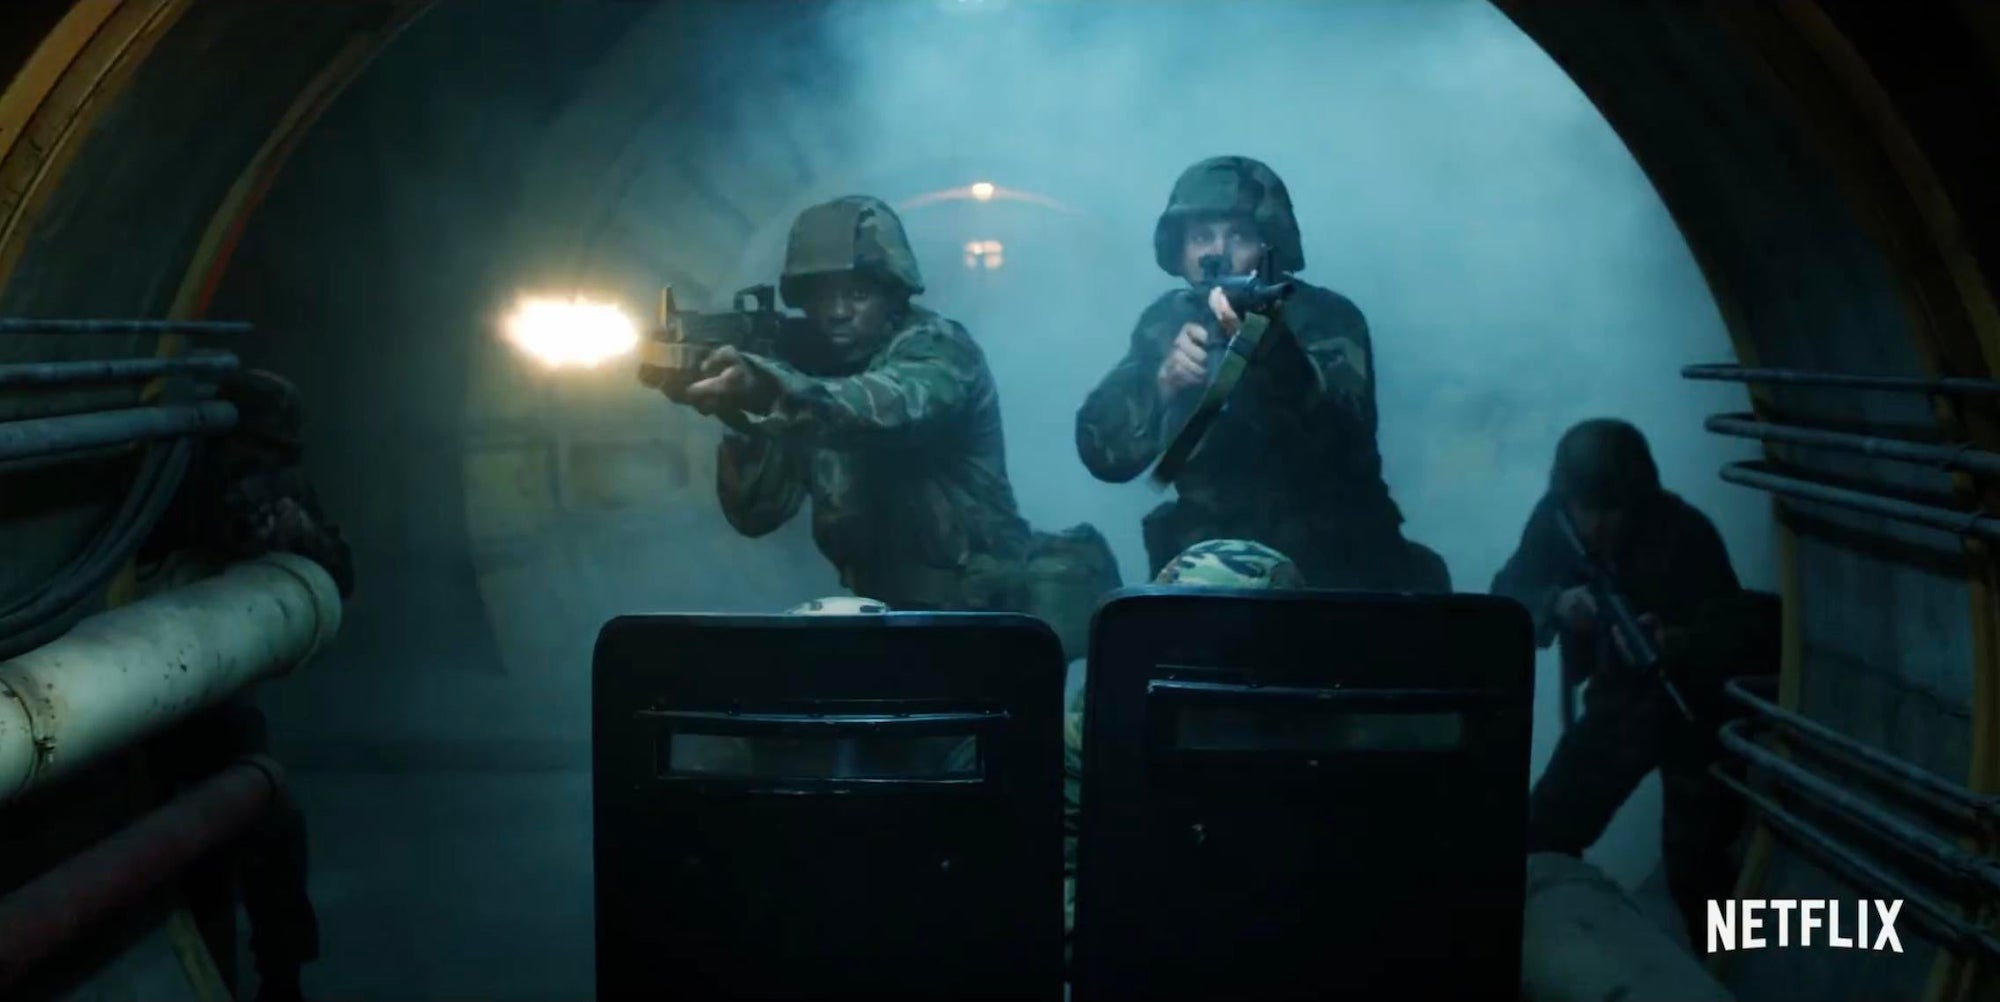 Members of a military group hold up guns in what appears to be an underground bunker in 'Stranger Things 4'